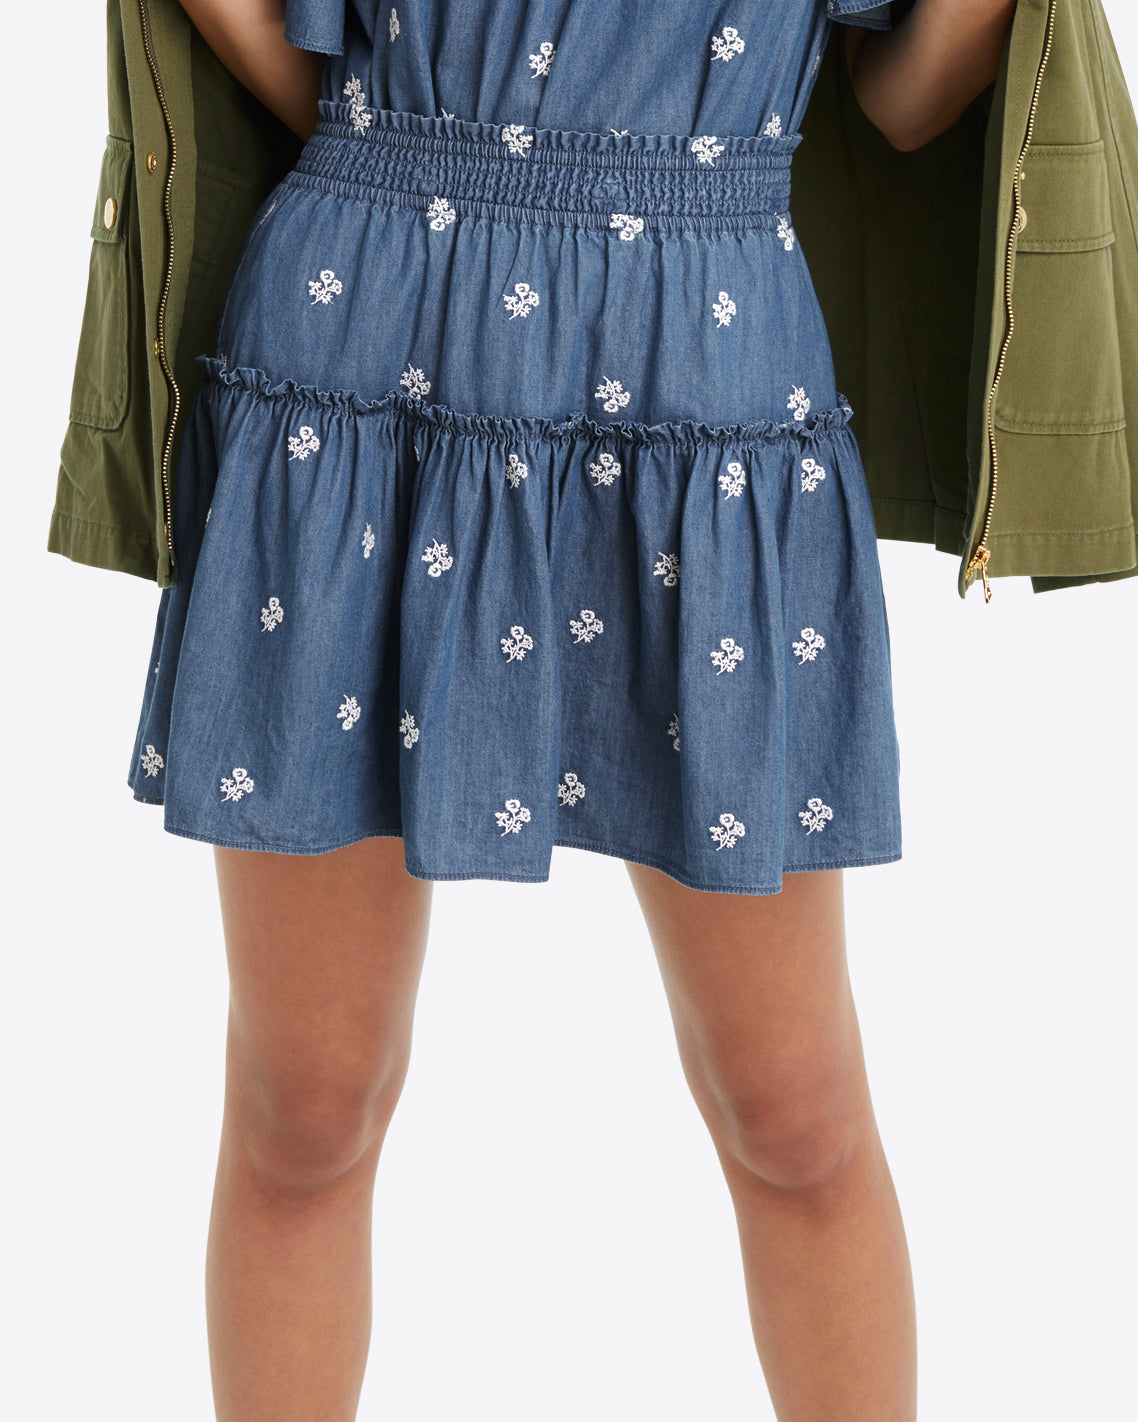 Tiered Chambray Skirt - Ready to Wear